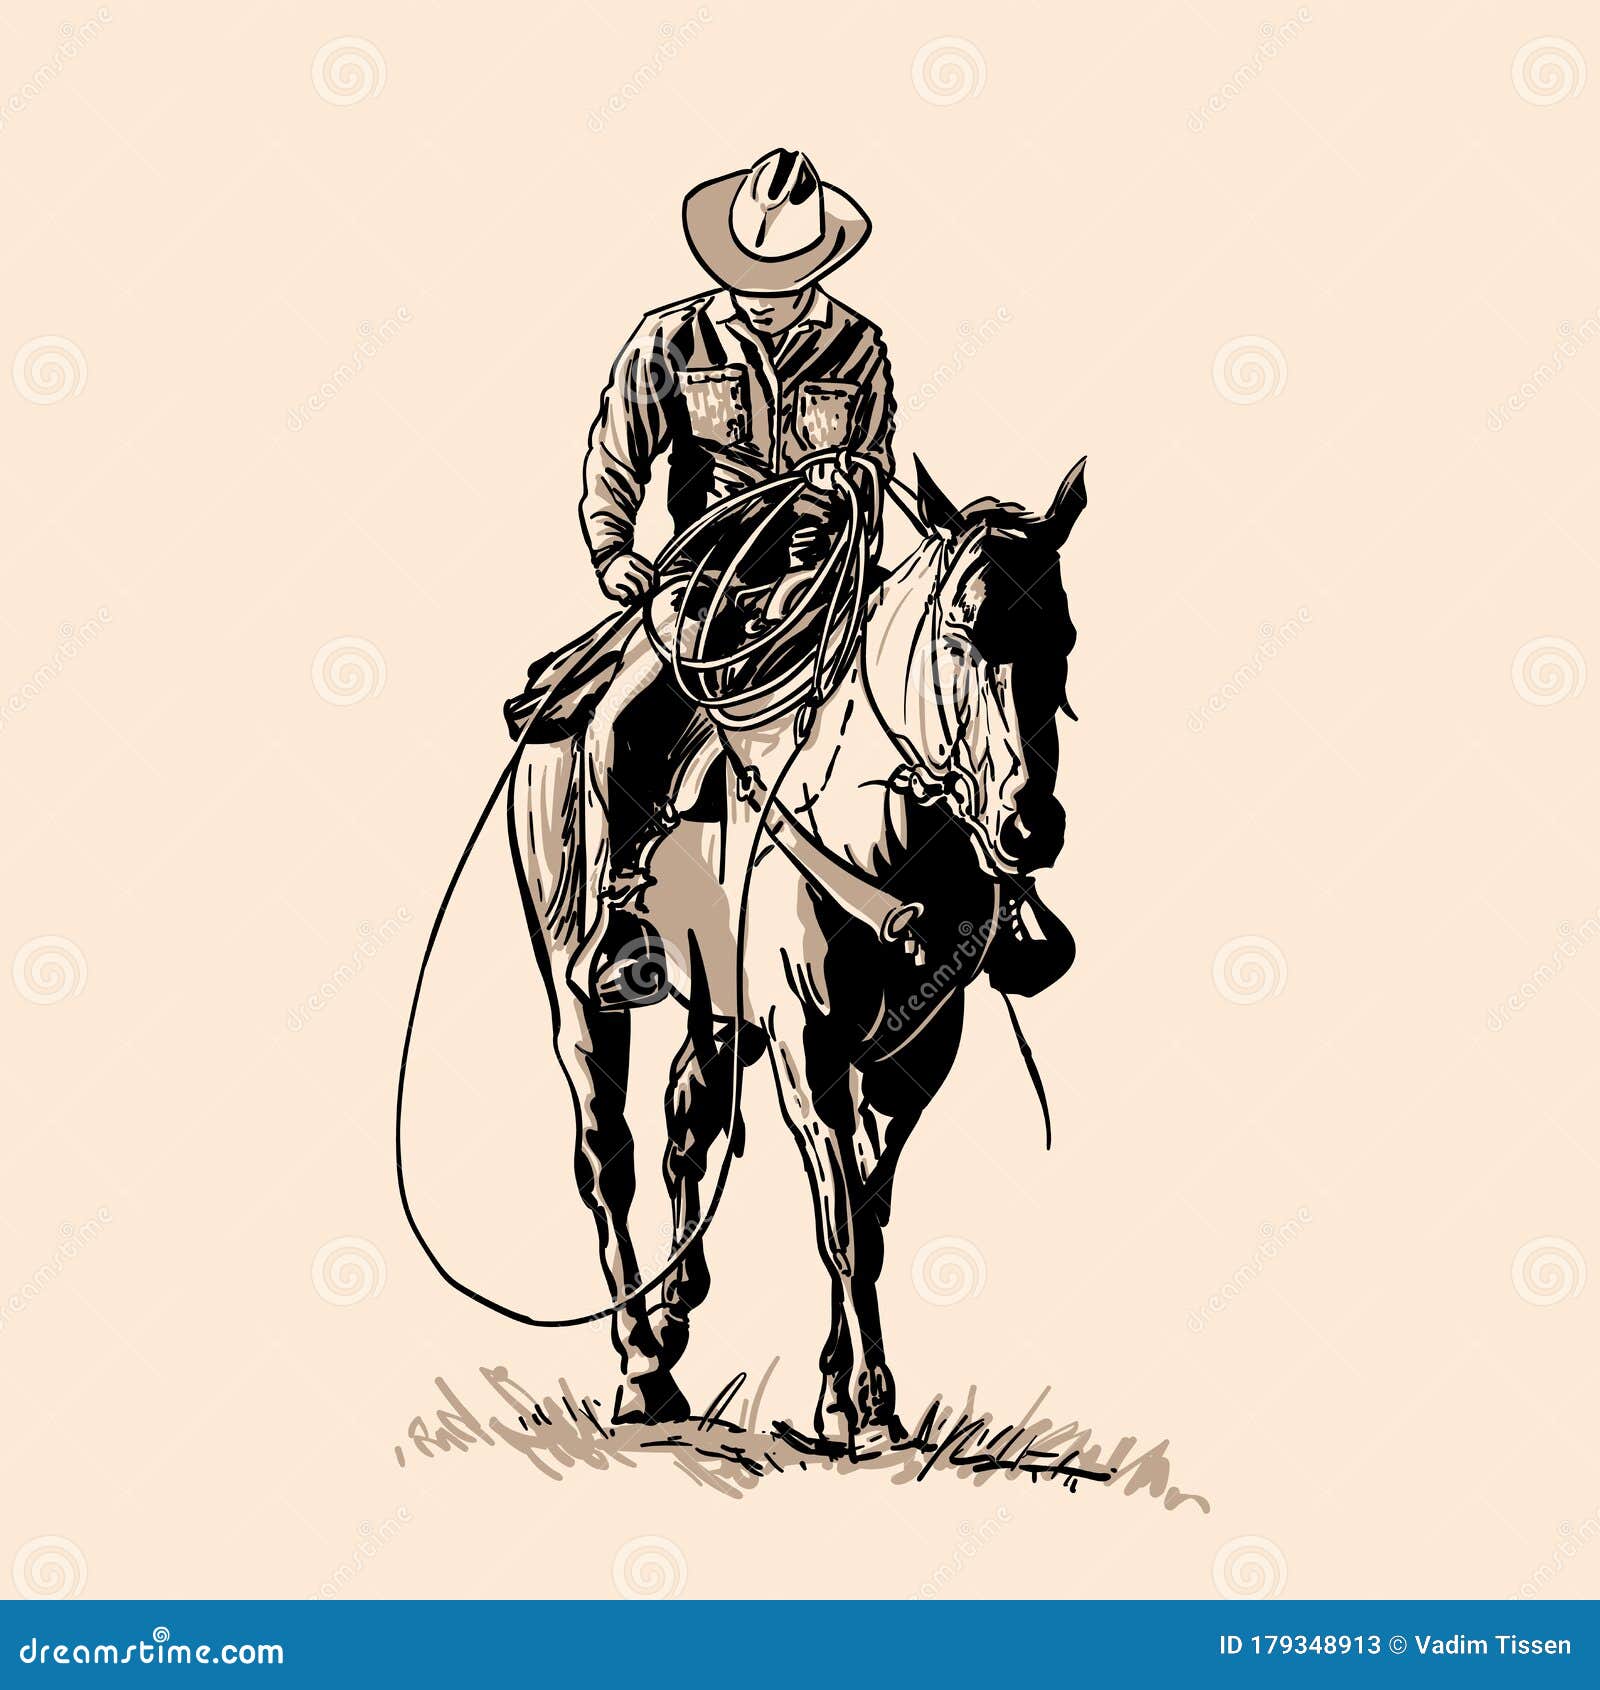 american cowboy riding horse and throwing lasso.